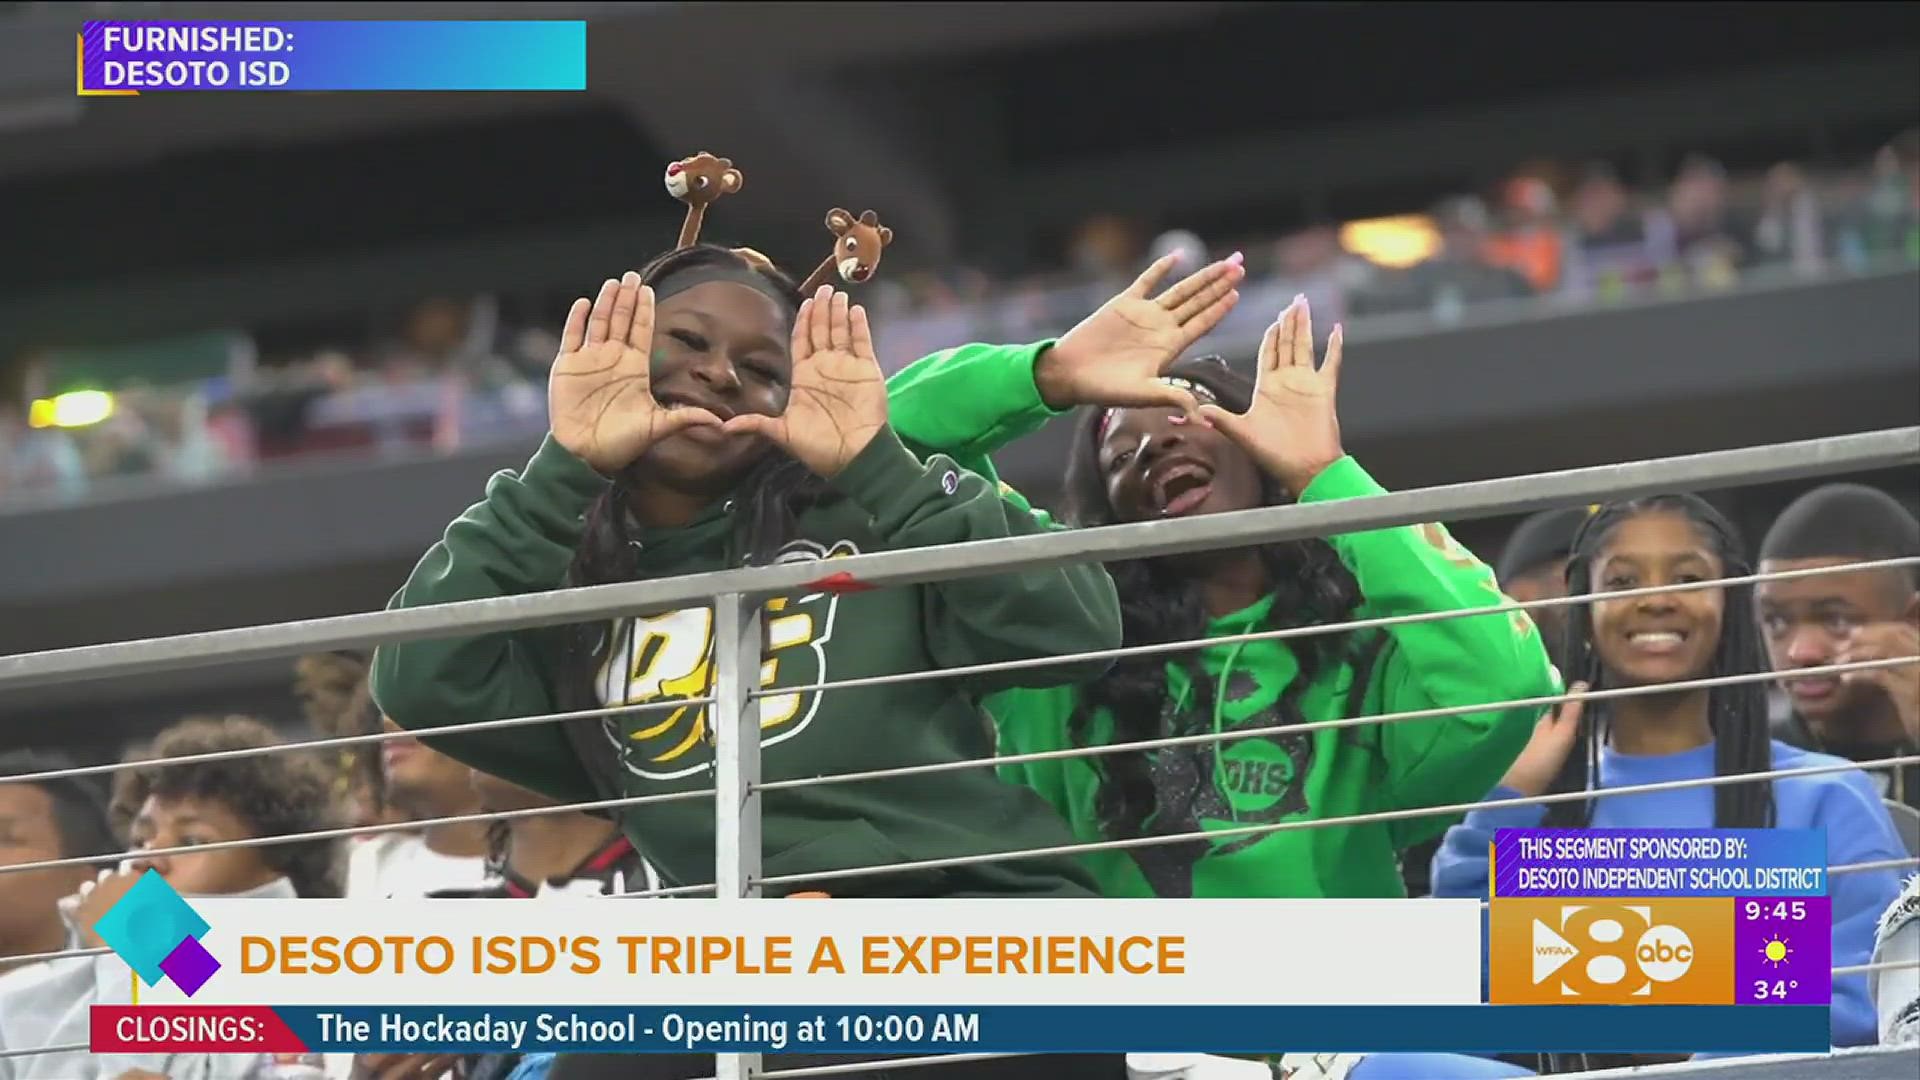 This segment is sponsored by Desoto Independent School District.